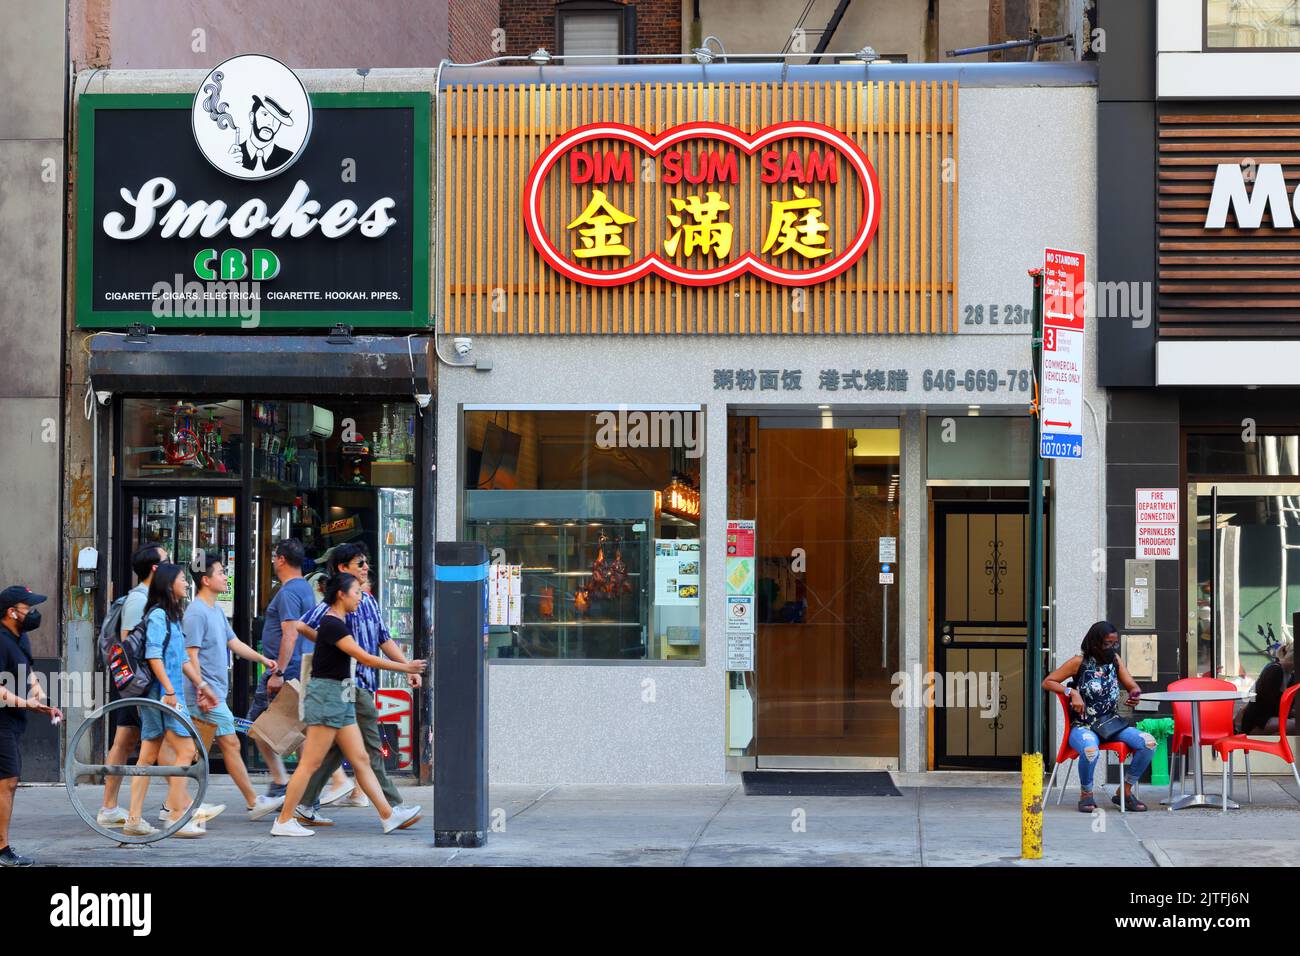 Dim Sum Sam 金滿庭, 28 E 23rd St, New York, NYC storefront photo of a fast casual Cantonese Chinese restaurant in Manhattan's Flatiron District. Stock Photo